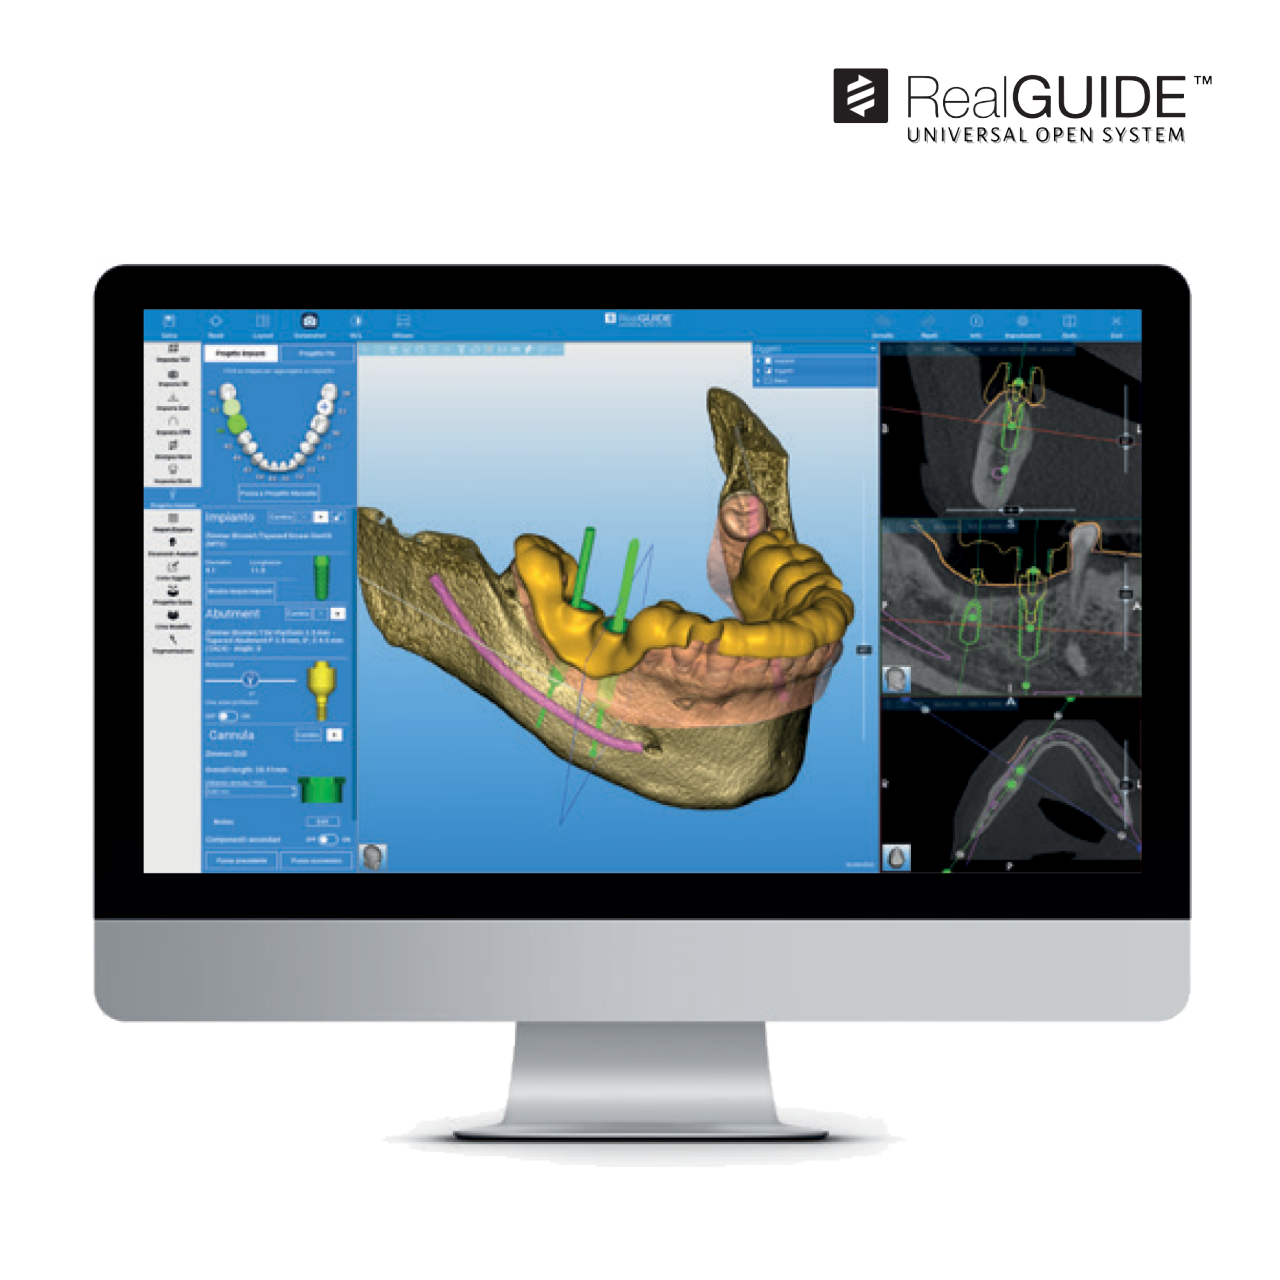 RealGUIDE software screen offering everything you might need for precise planning, designing, and predictable placement of dental implants.